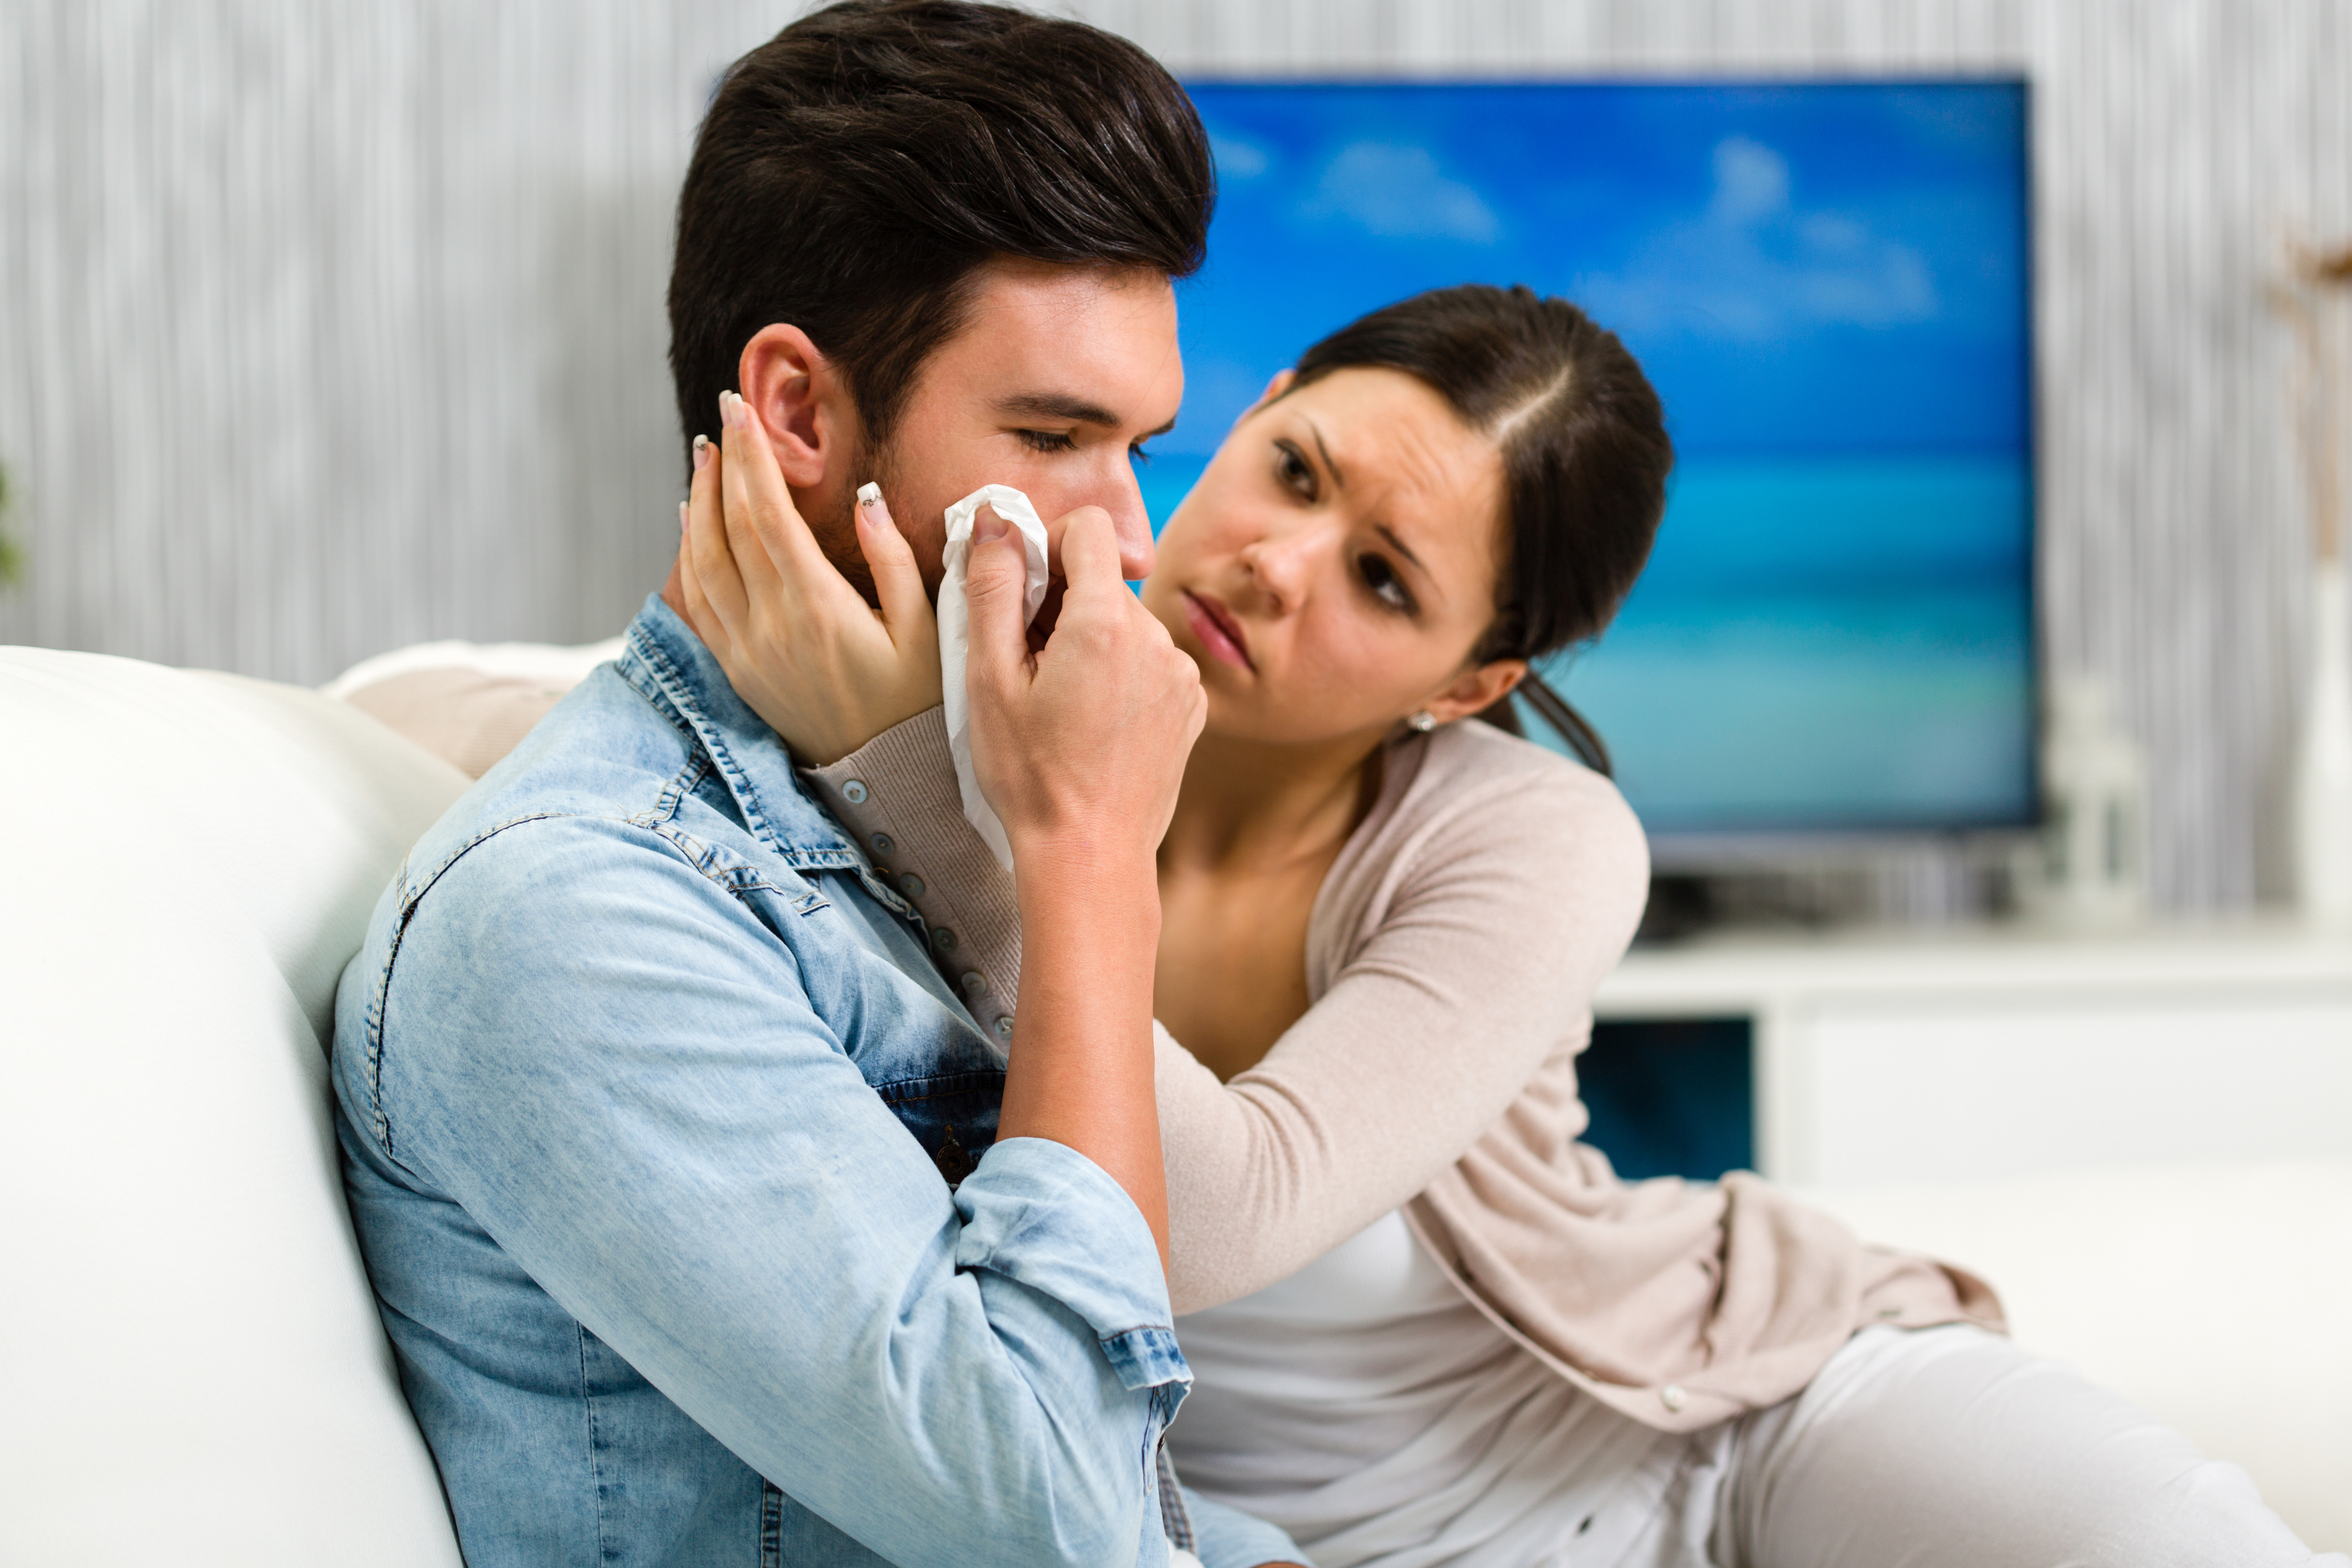 What Should You Do To Comfort Your Boyfriend When He Cries?